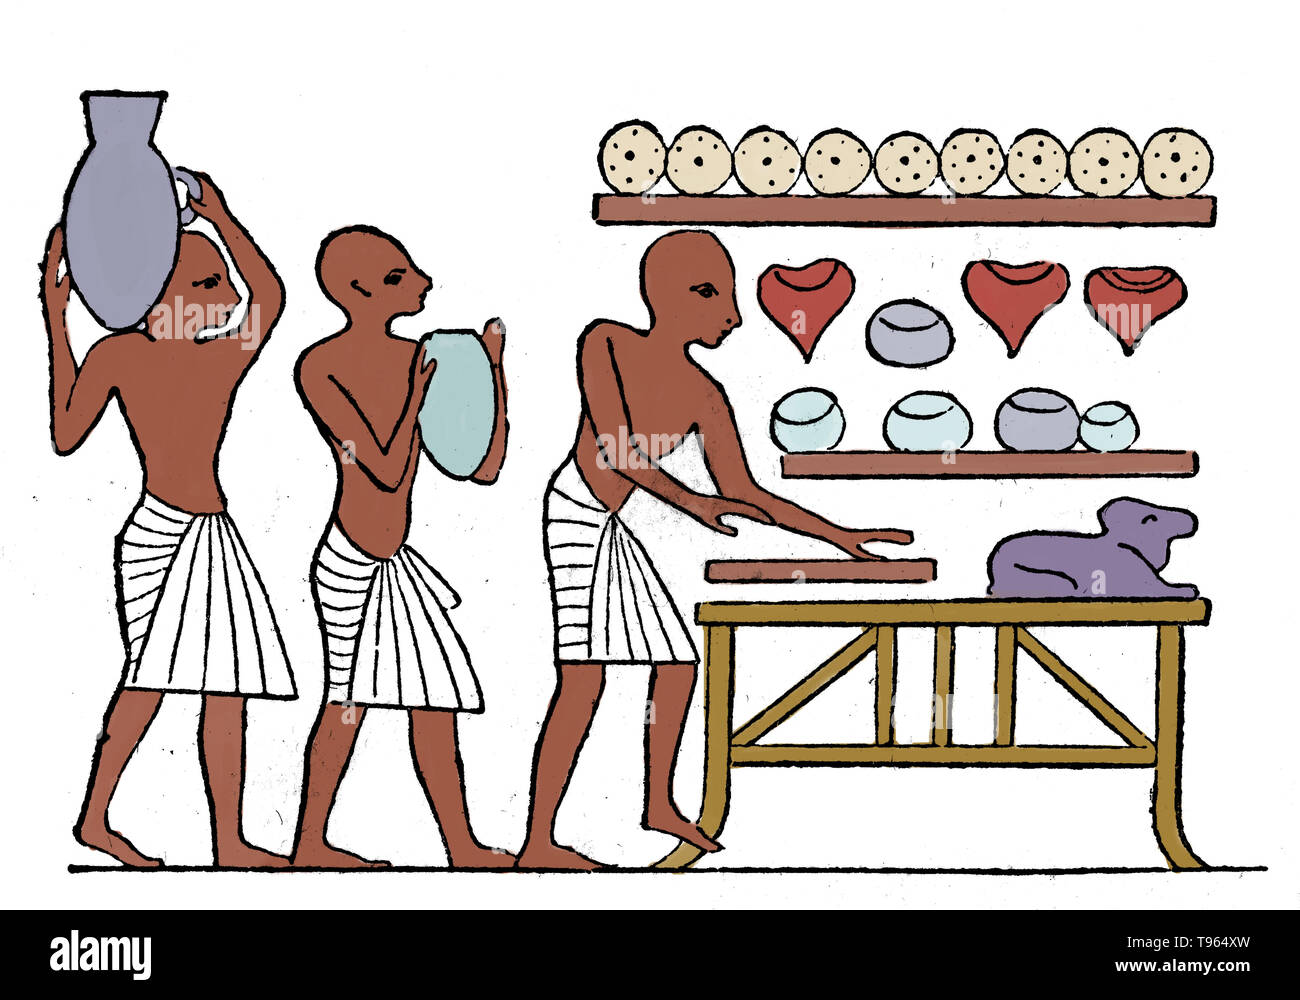 The cuisine of ancient Egypt covers a span of over three thousand years, but still retained many consistent traits until well into Greco-Roman times. The staples of both poor and wealthy Egyptians were bread and beer, often accompanied by green-shooted onions, other vegetables, and to a lesser extent meat, game and fish. Food could be prepared by stewing, baking, boiling, grilling, frying, or roasting. Stock Photo